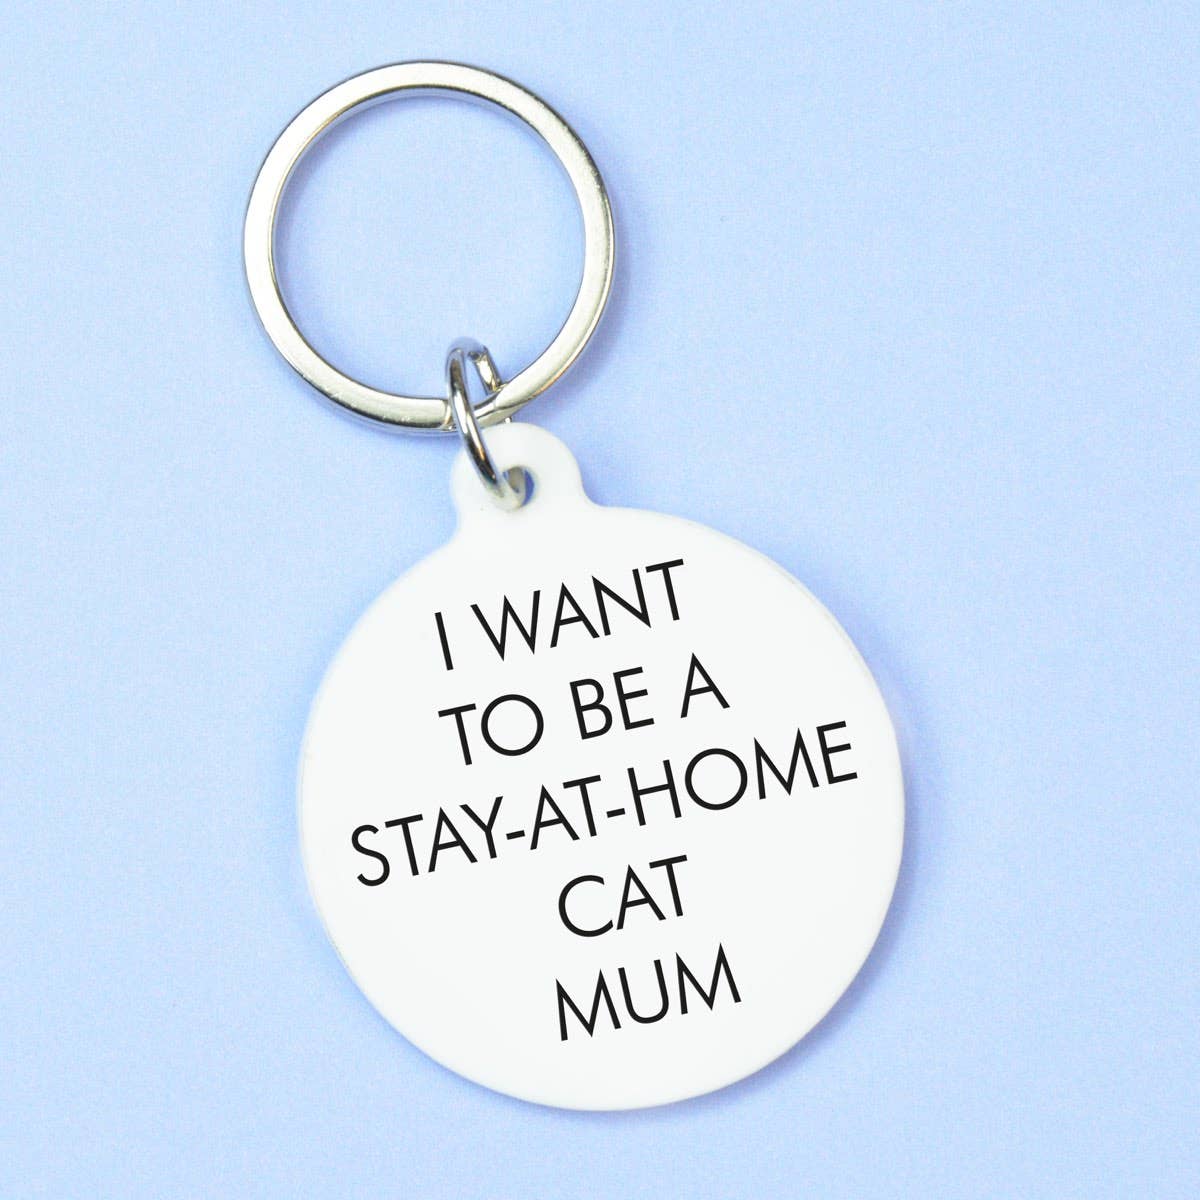 I Want to be a Stay-at-Home Cat Mum Keytag